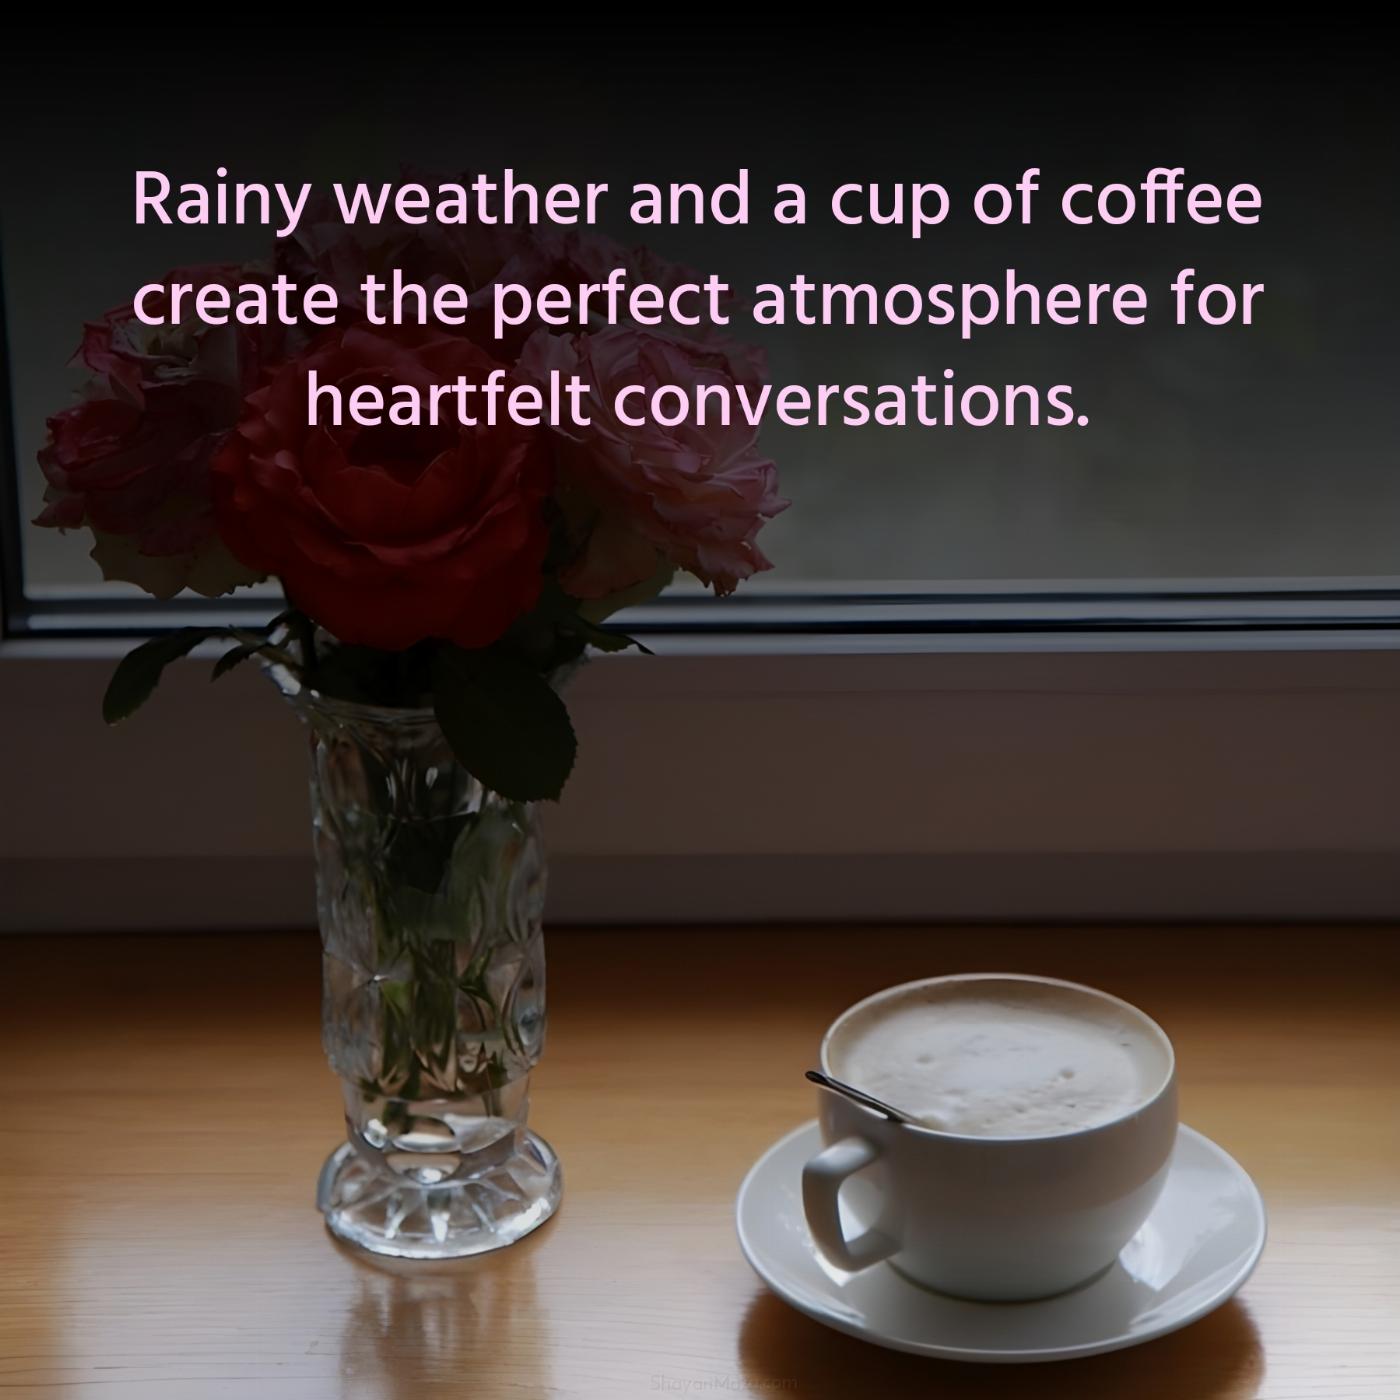 Rainy weather and a cup of coffee create the perfect atmosphere